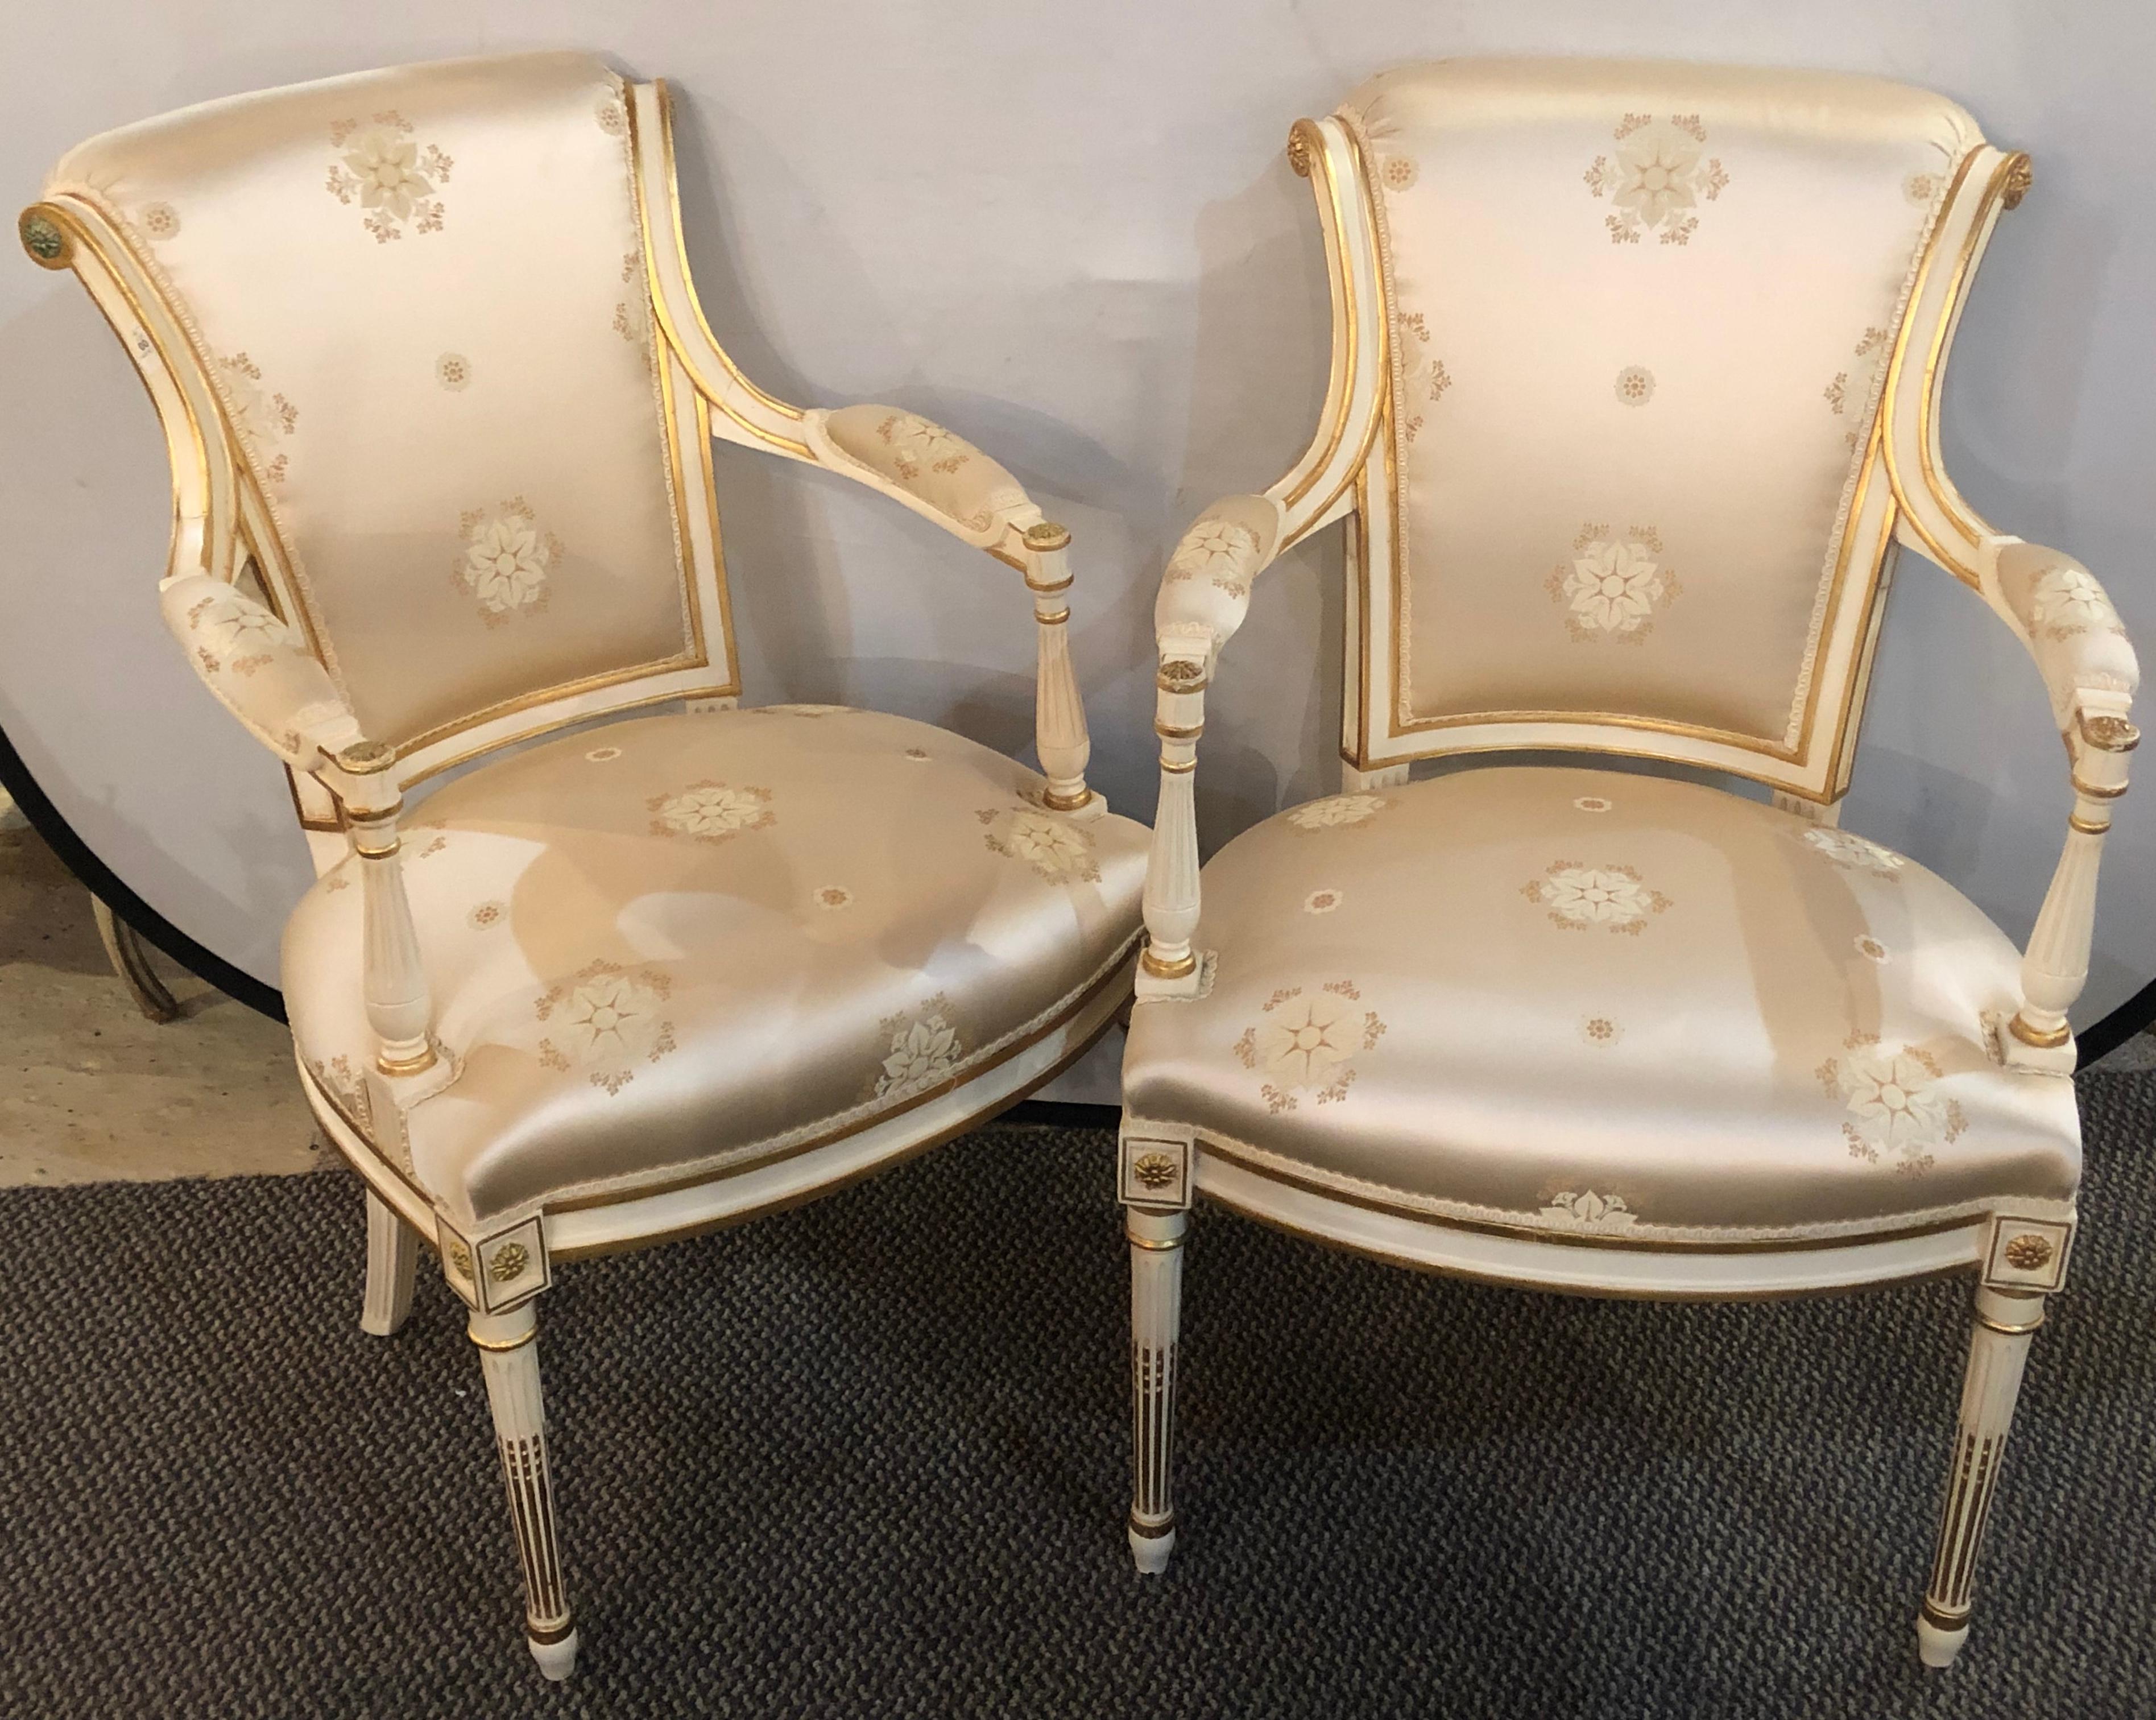 Louis XVI Style Hollywood Regency Fauteuils Scalamandre Silk Upholstery Jansen In Good Condition For Sale In Stamford, CT